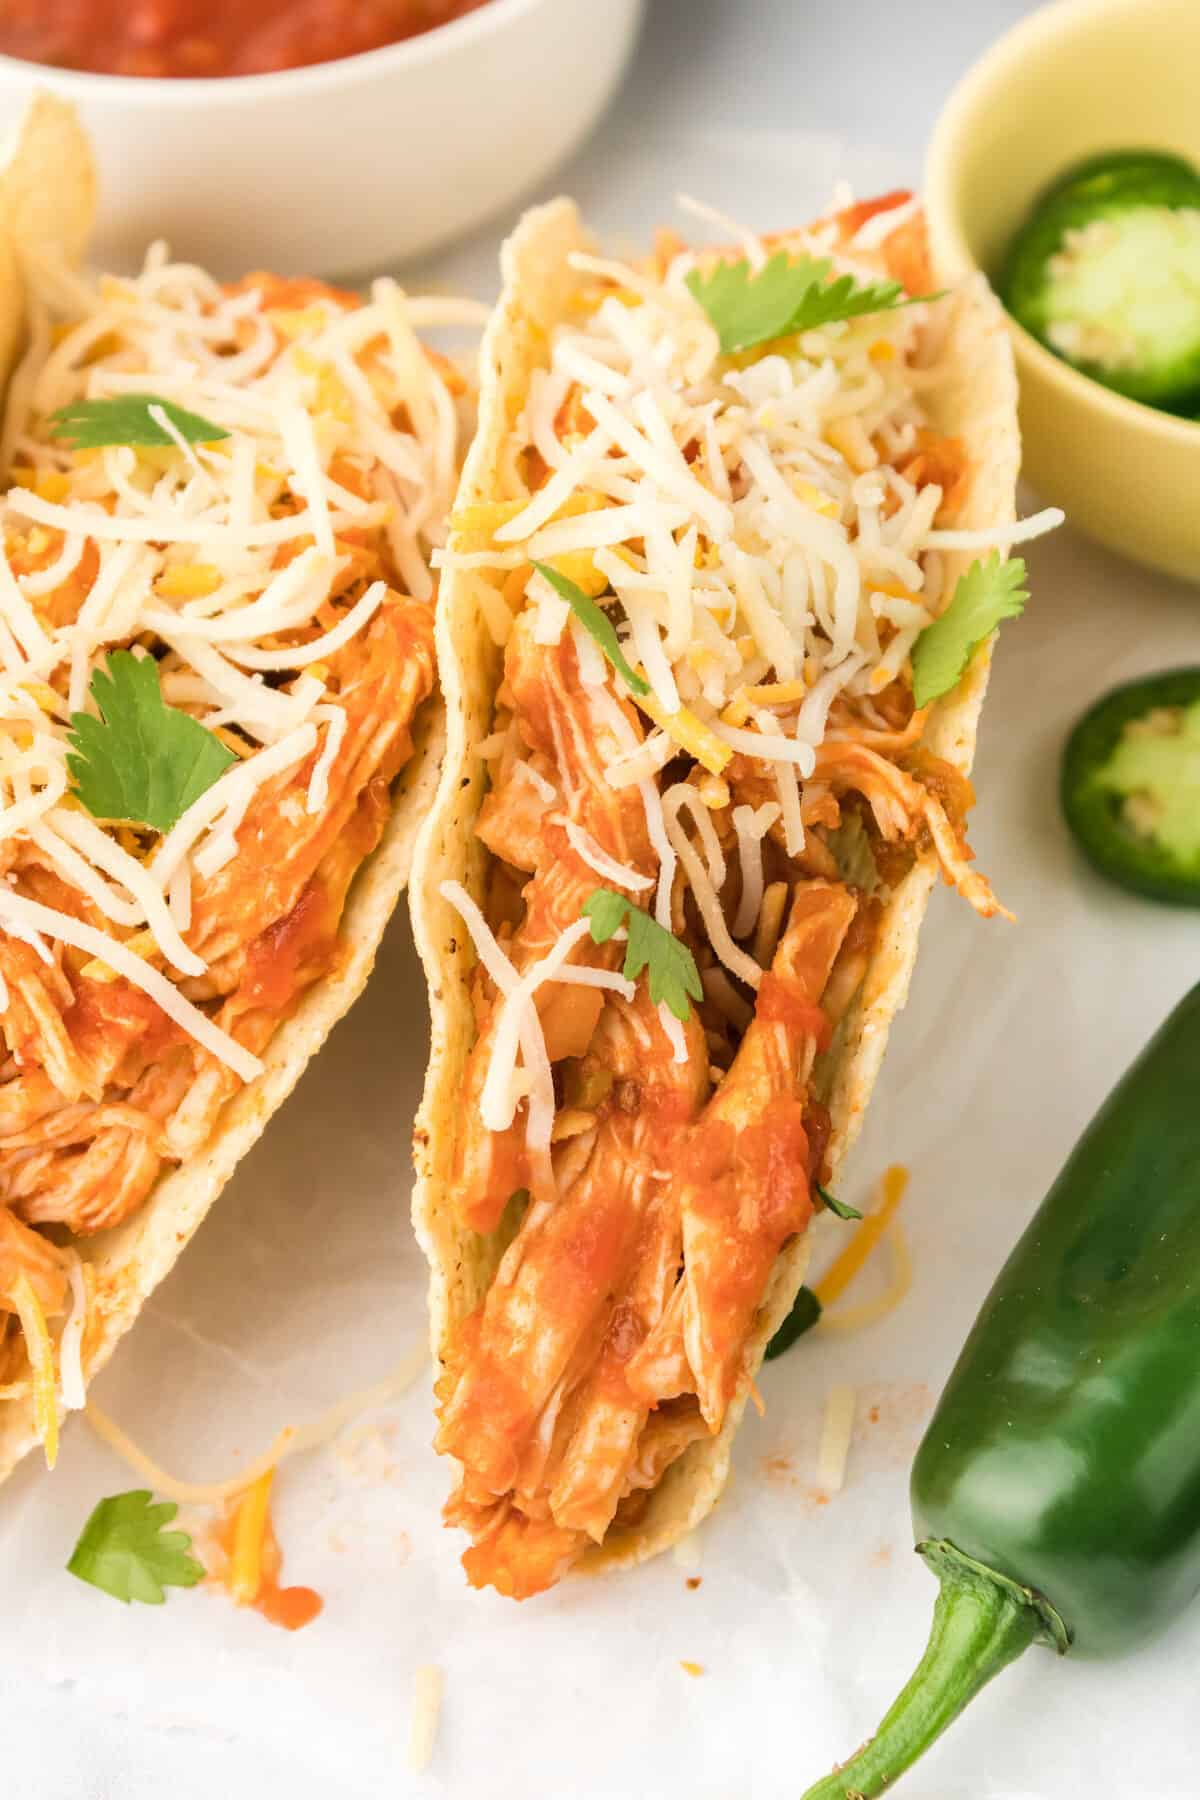 shredded chicken tacos on with counter with jalapenos and salsa in small white bowls. 